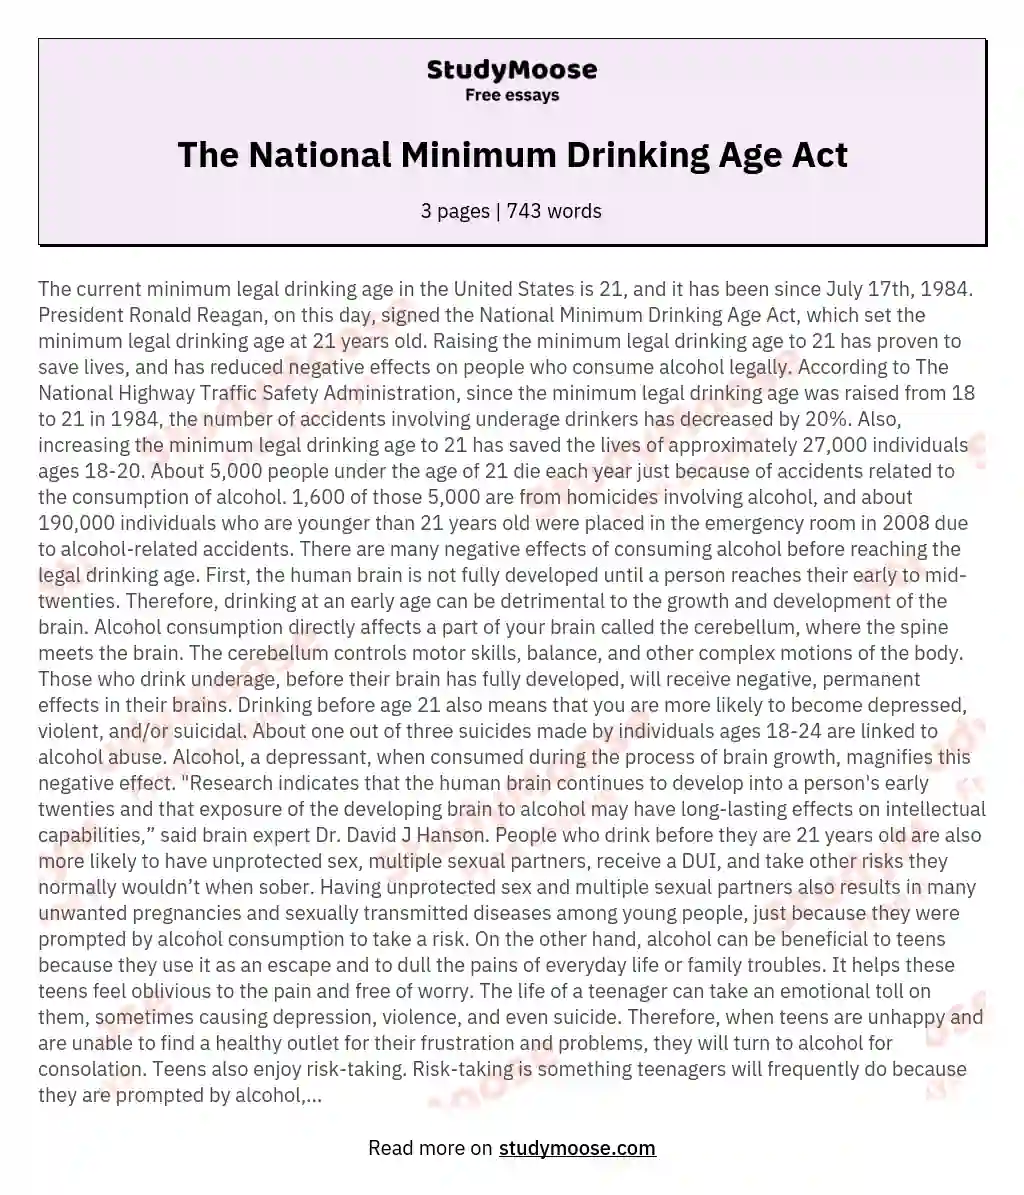 The National Minimum Drinking Age Act